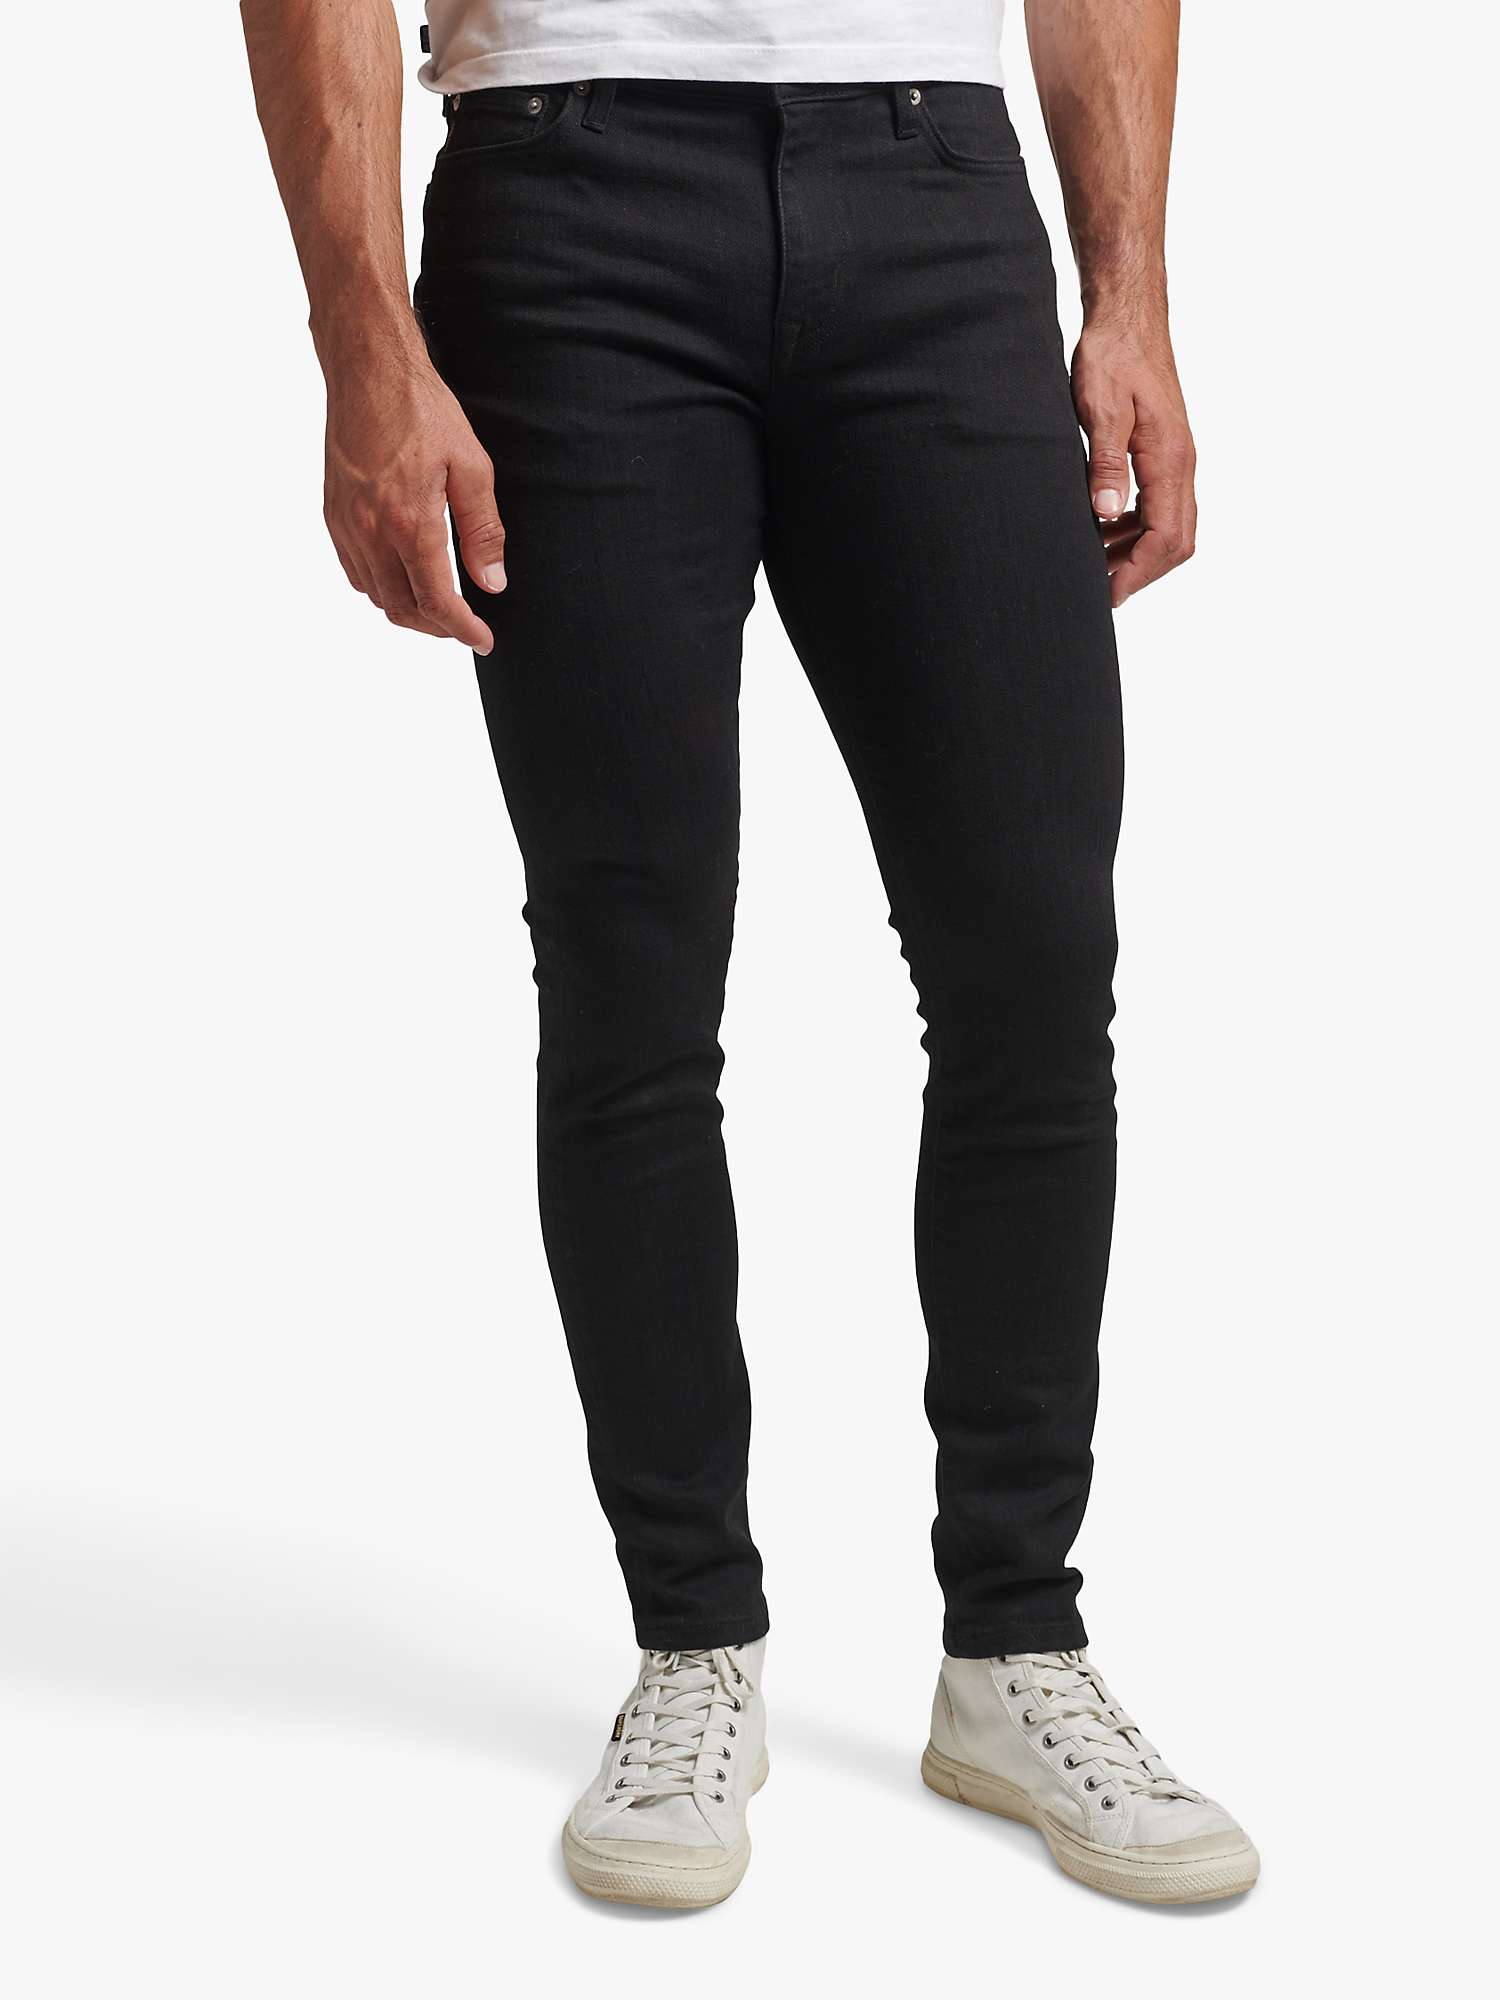 Buy Superdry Organic Cotton Skinny Jeans Online at johnlewis.com